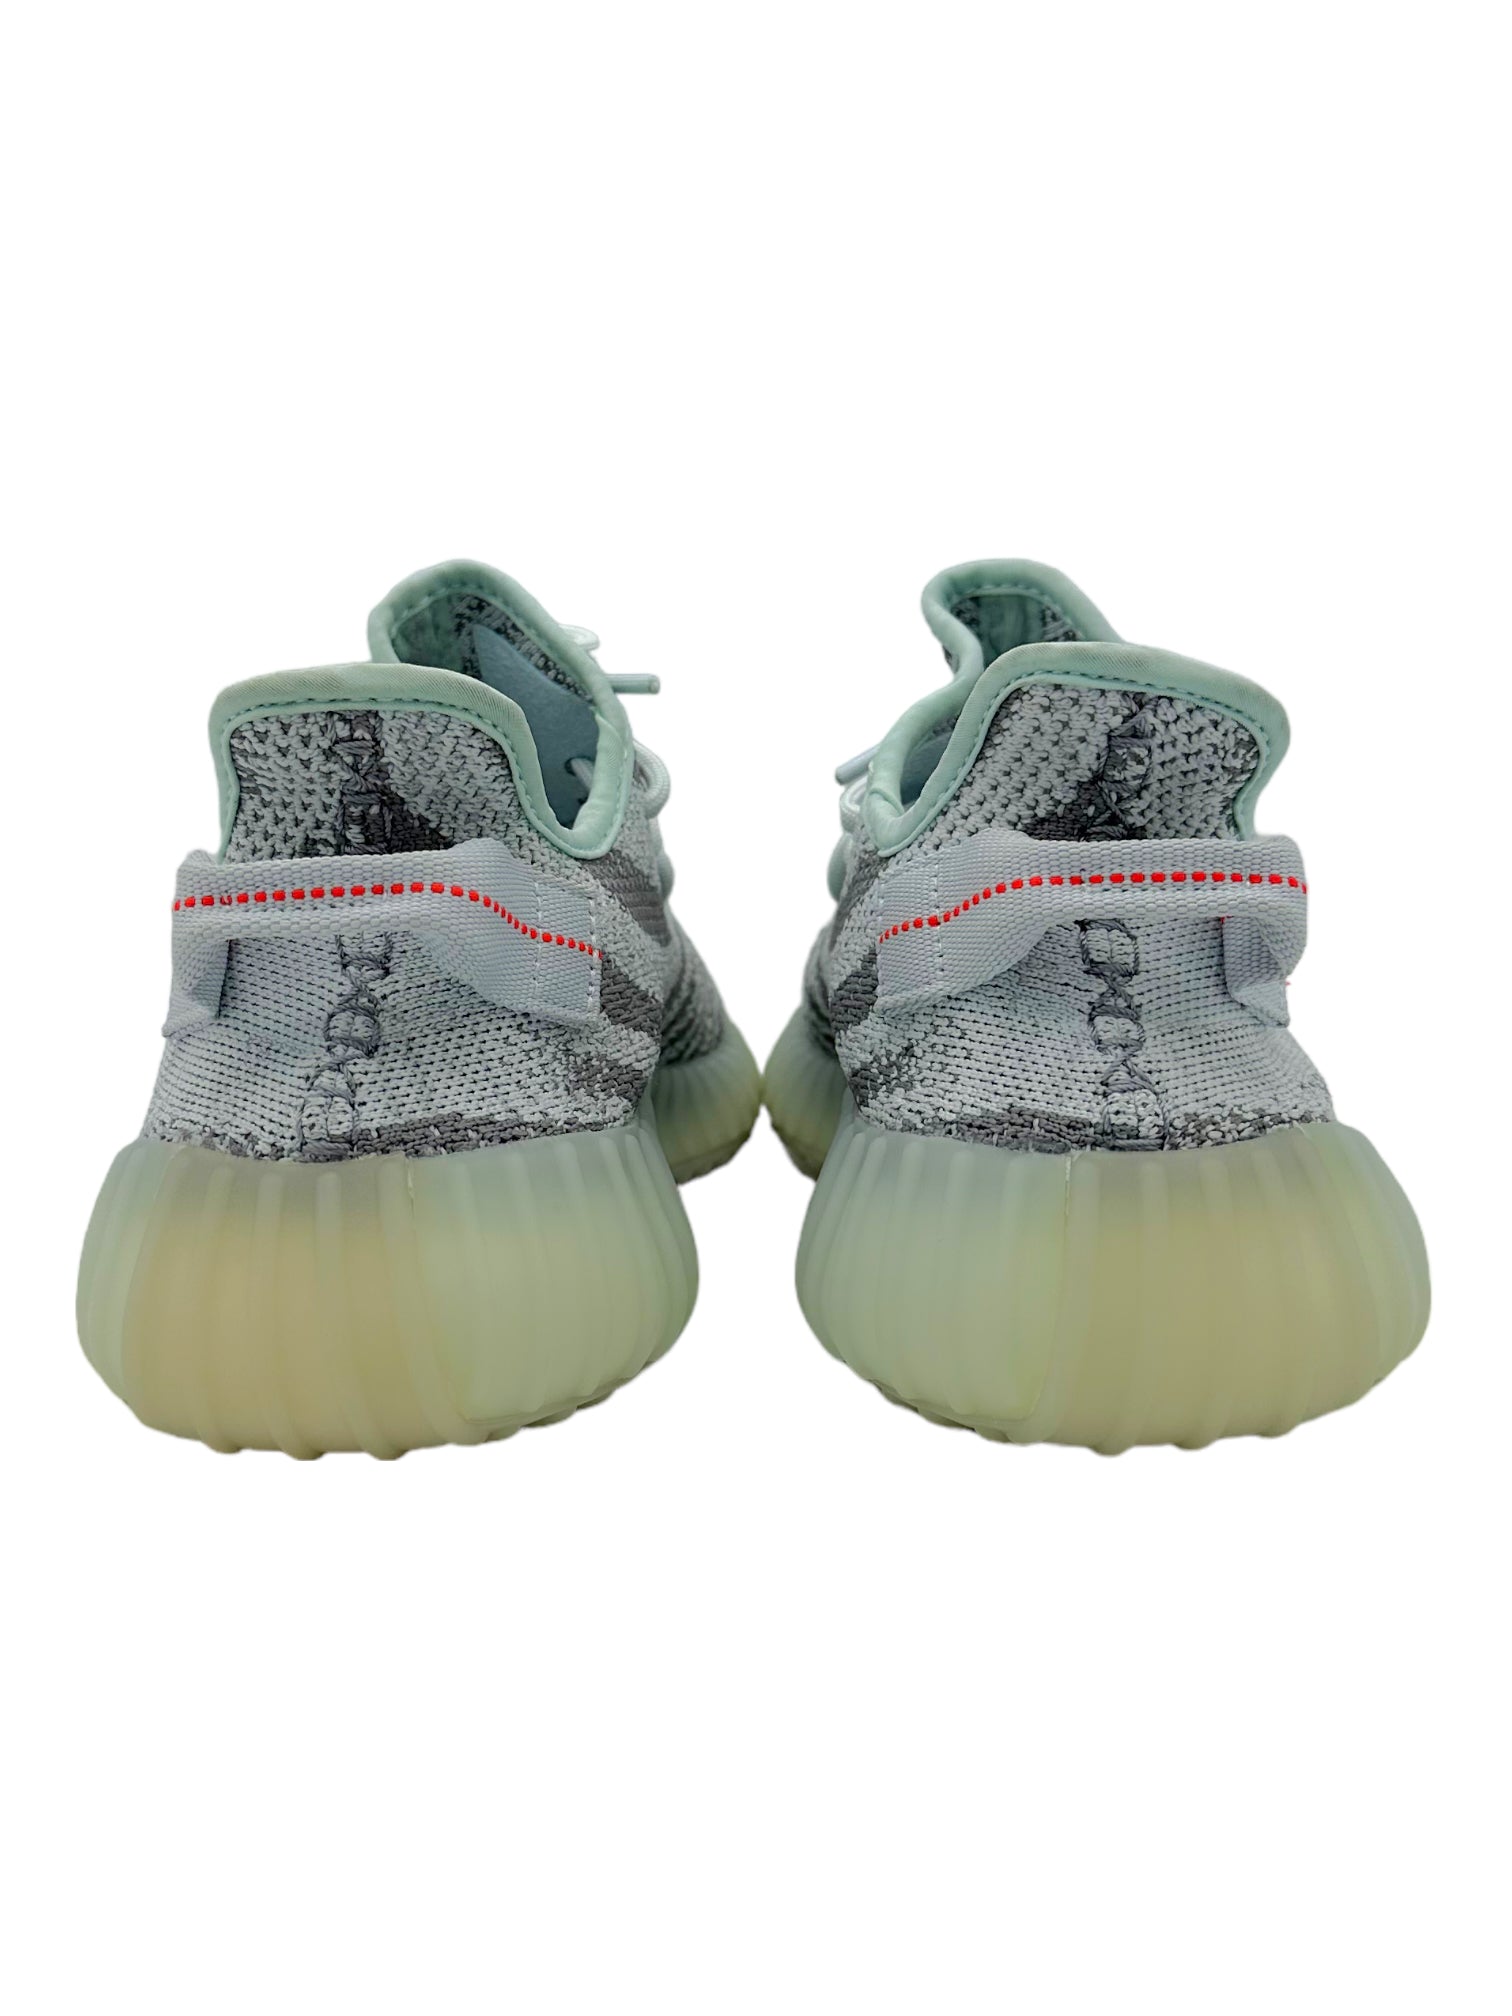 Adidas Yeezy 350 V2 Blue Tint Sneakers - Genuine Design Luxury Consignment. New & Pre-Owned Clothing, Shoes, & Accessories. Calgary, Canada